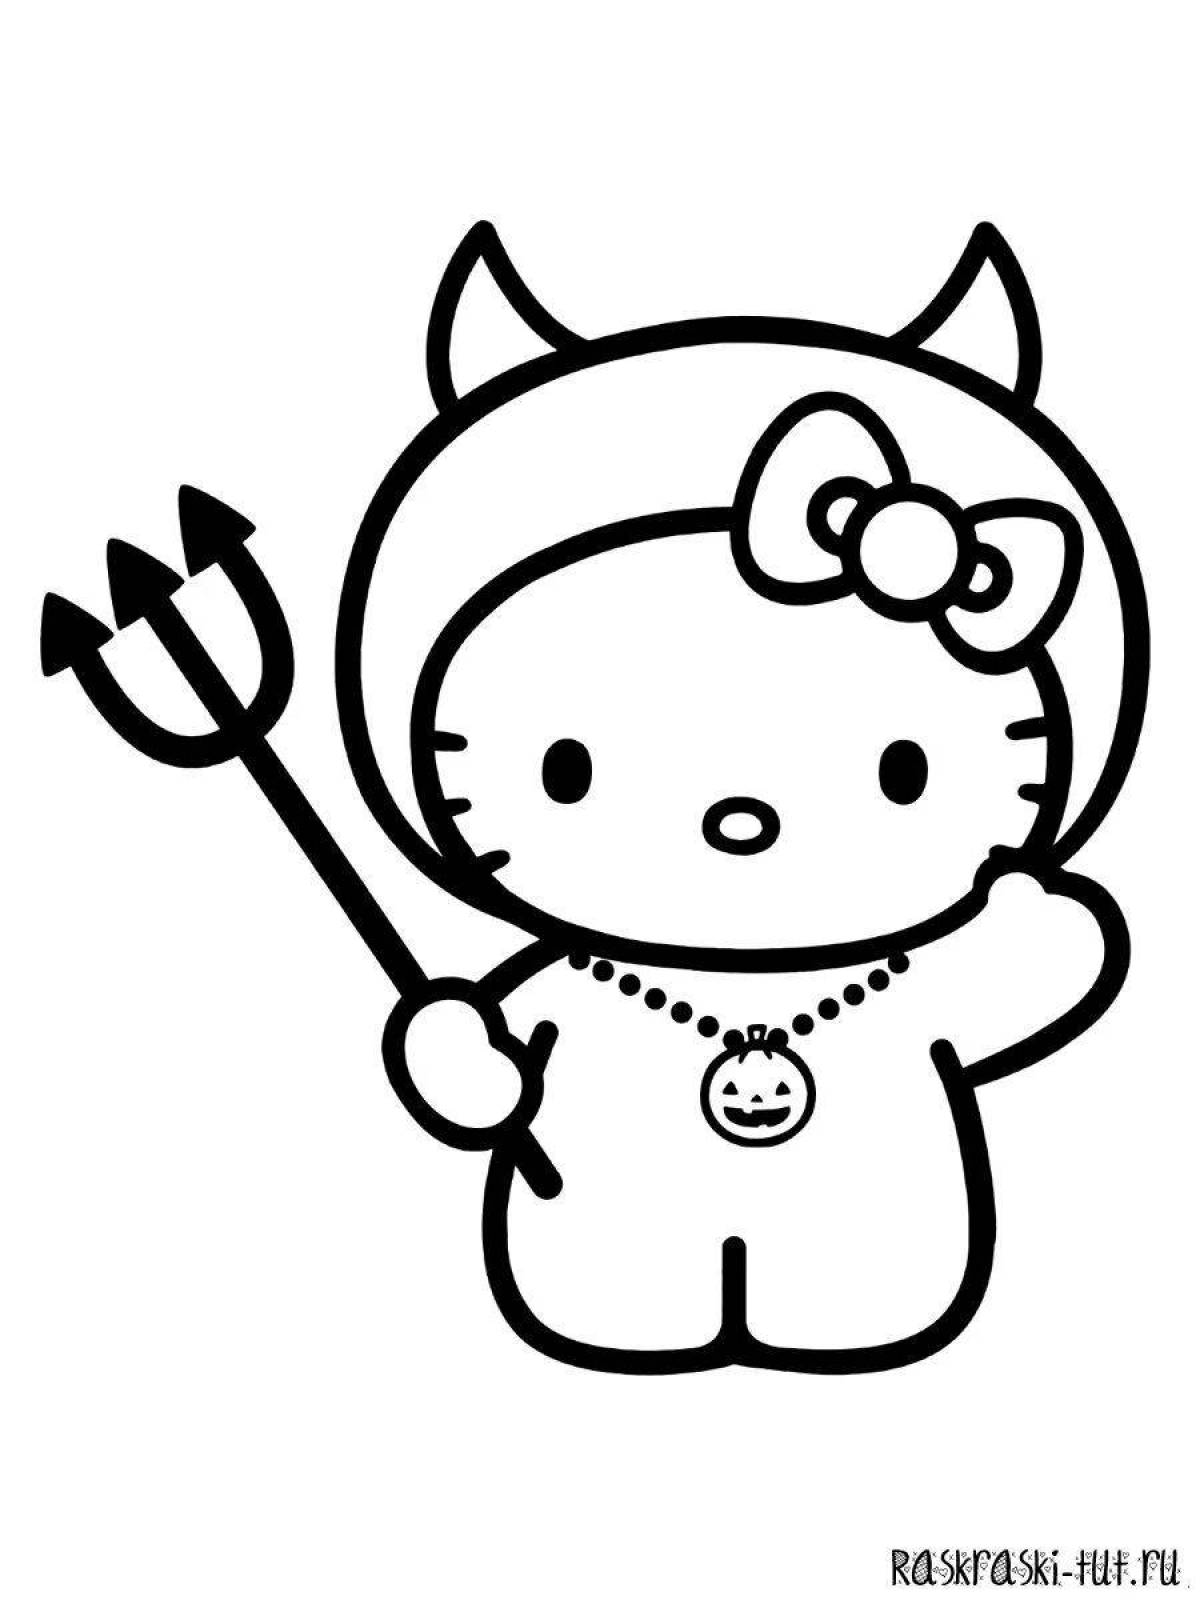 Bright hello kitty evil coloring page